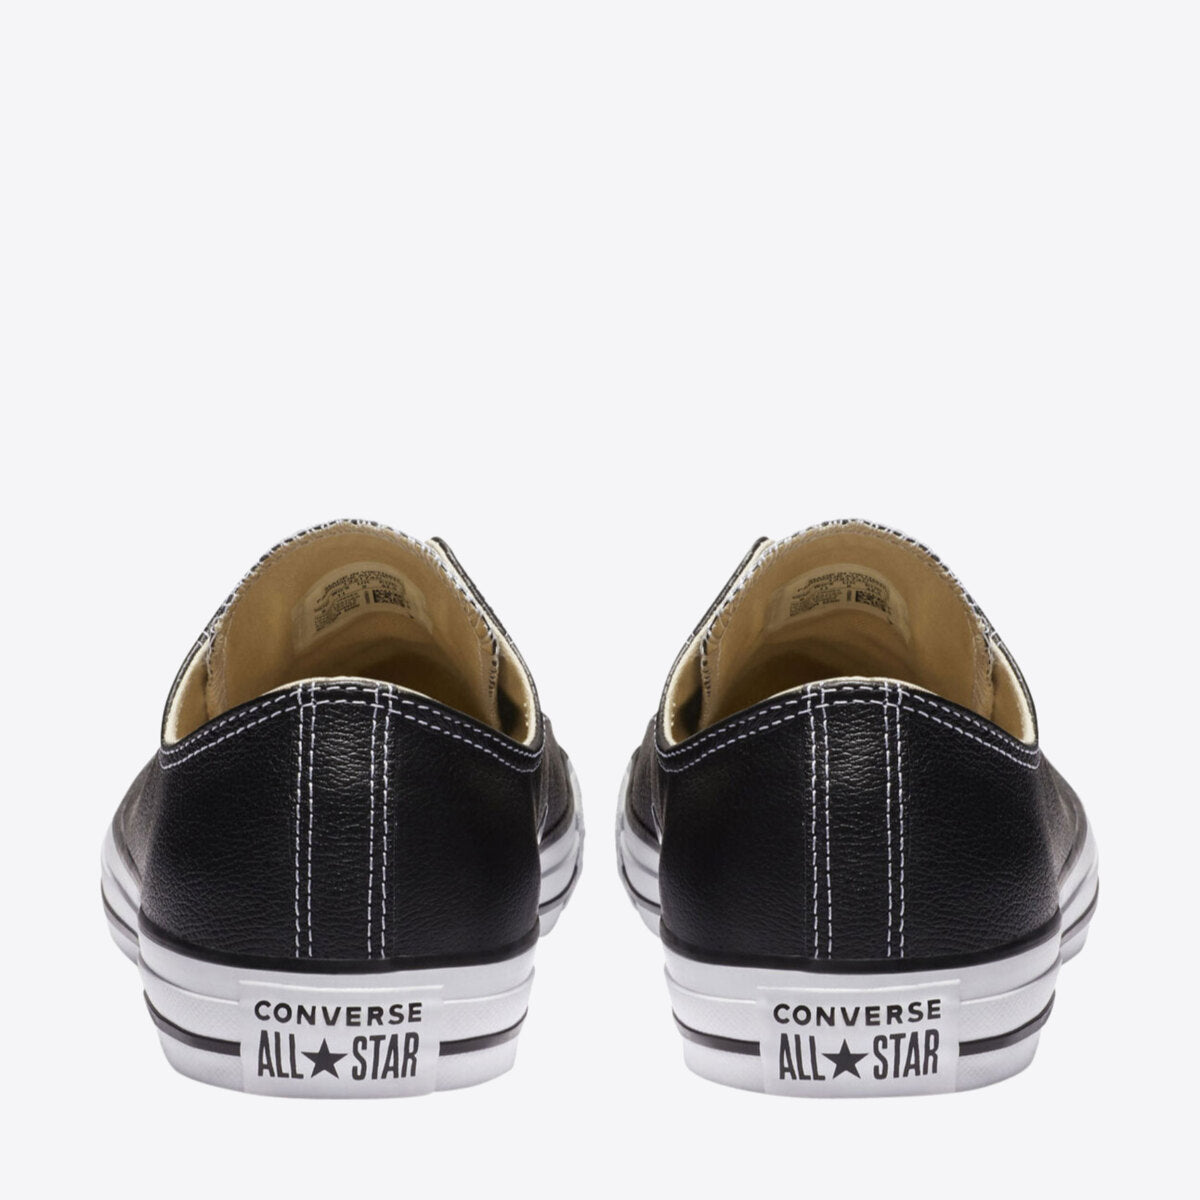  Chuck Taylor All Star Leather Low Top Black